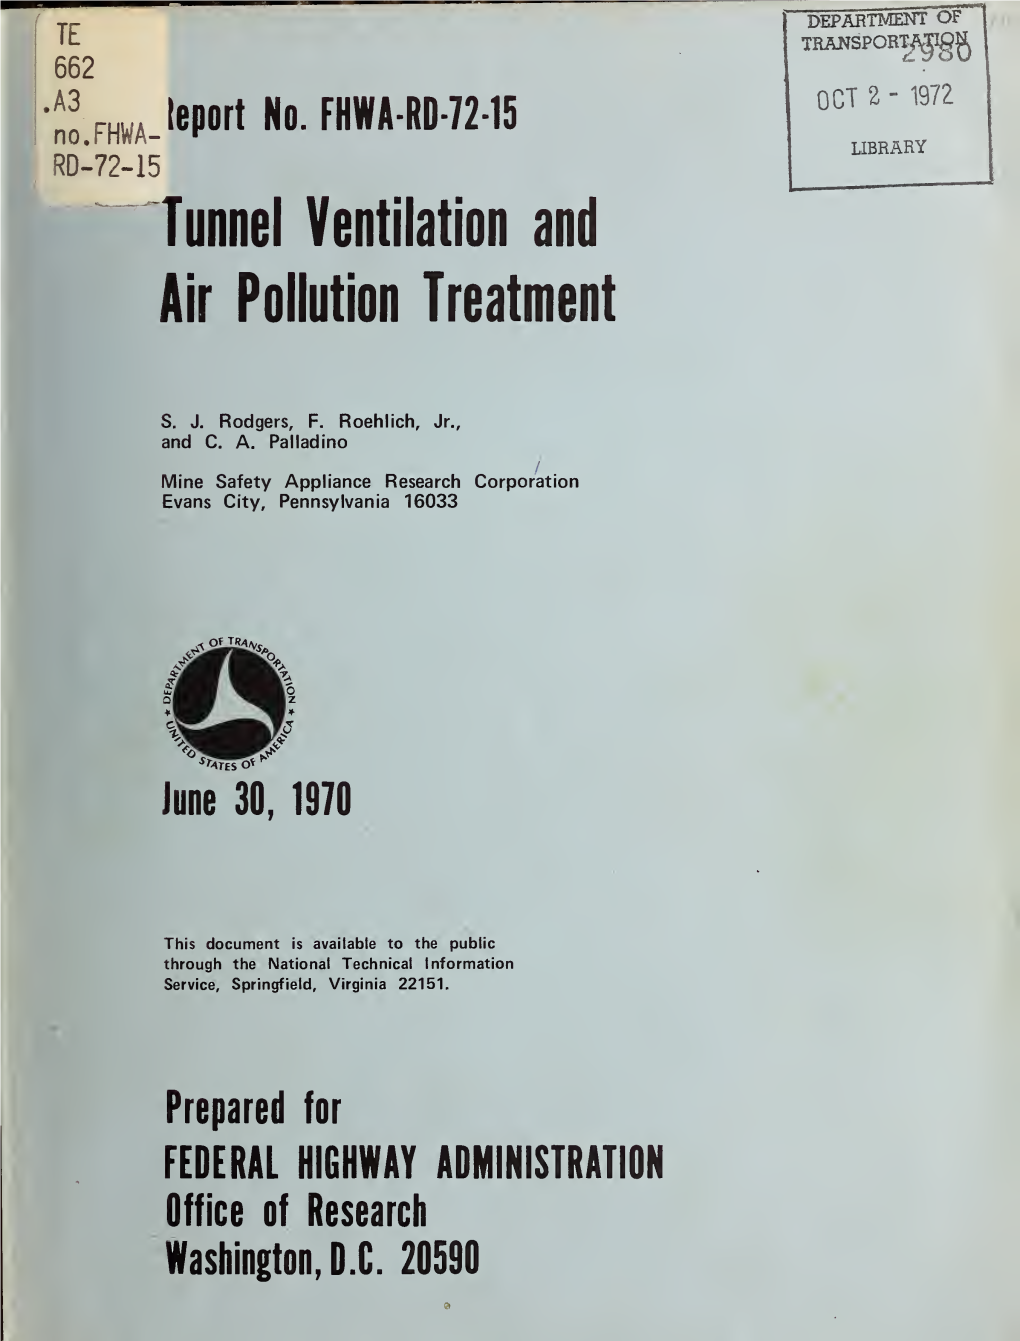 Tunnel Ventilation and Air Pollution Treatment Date of Preparation 6